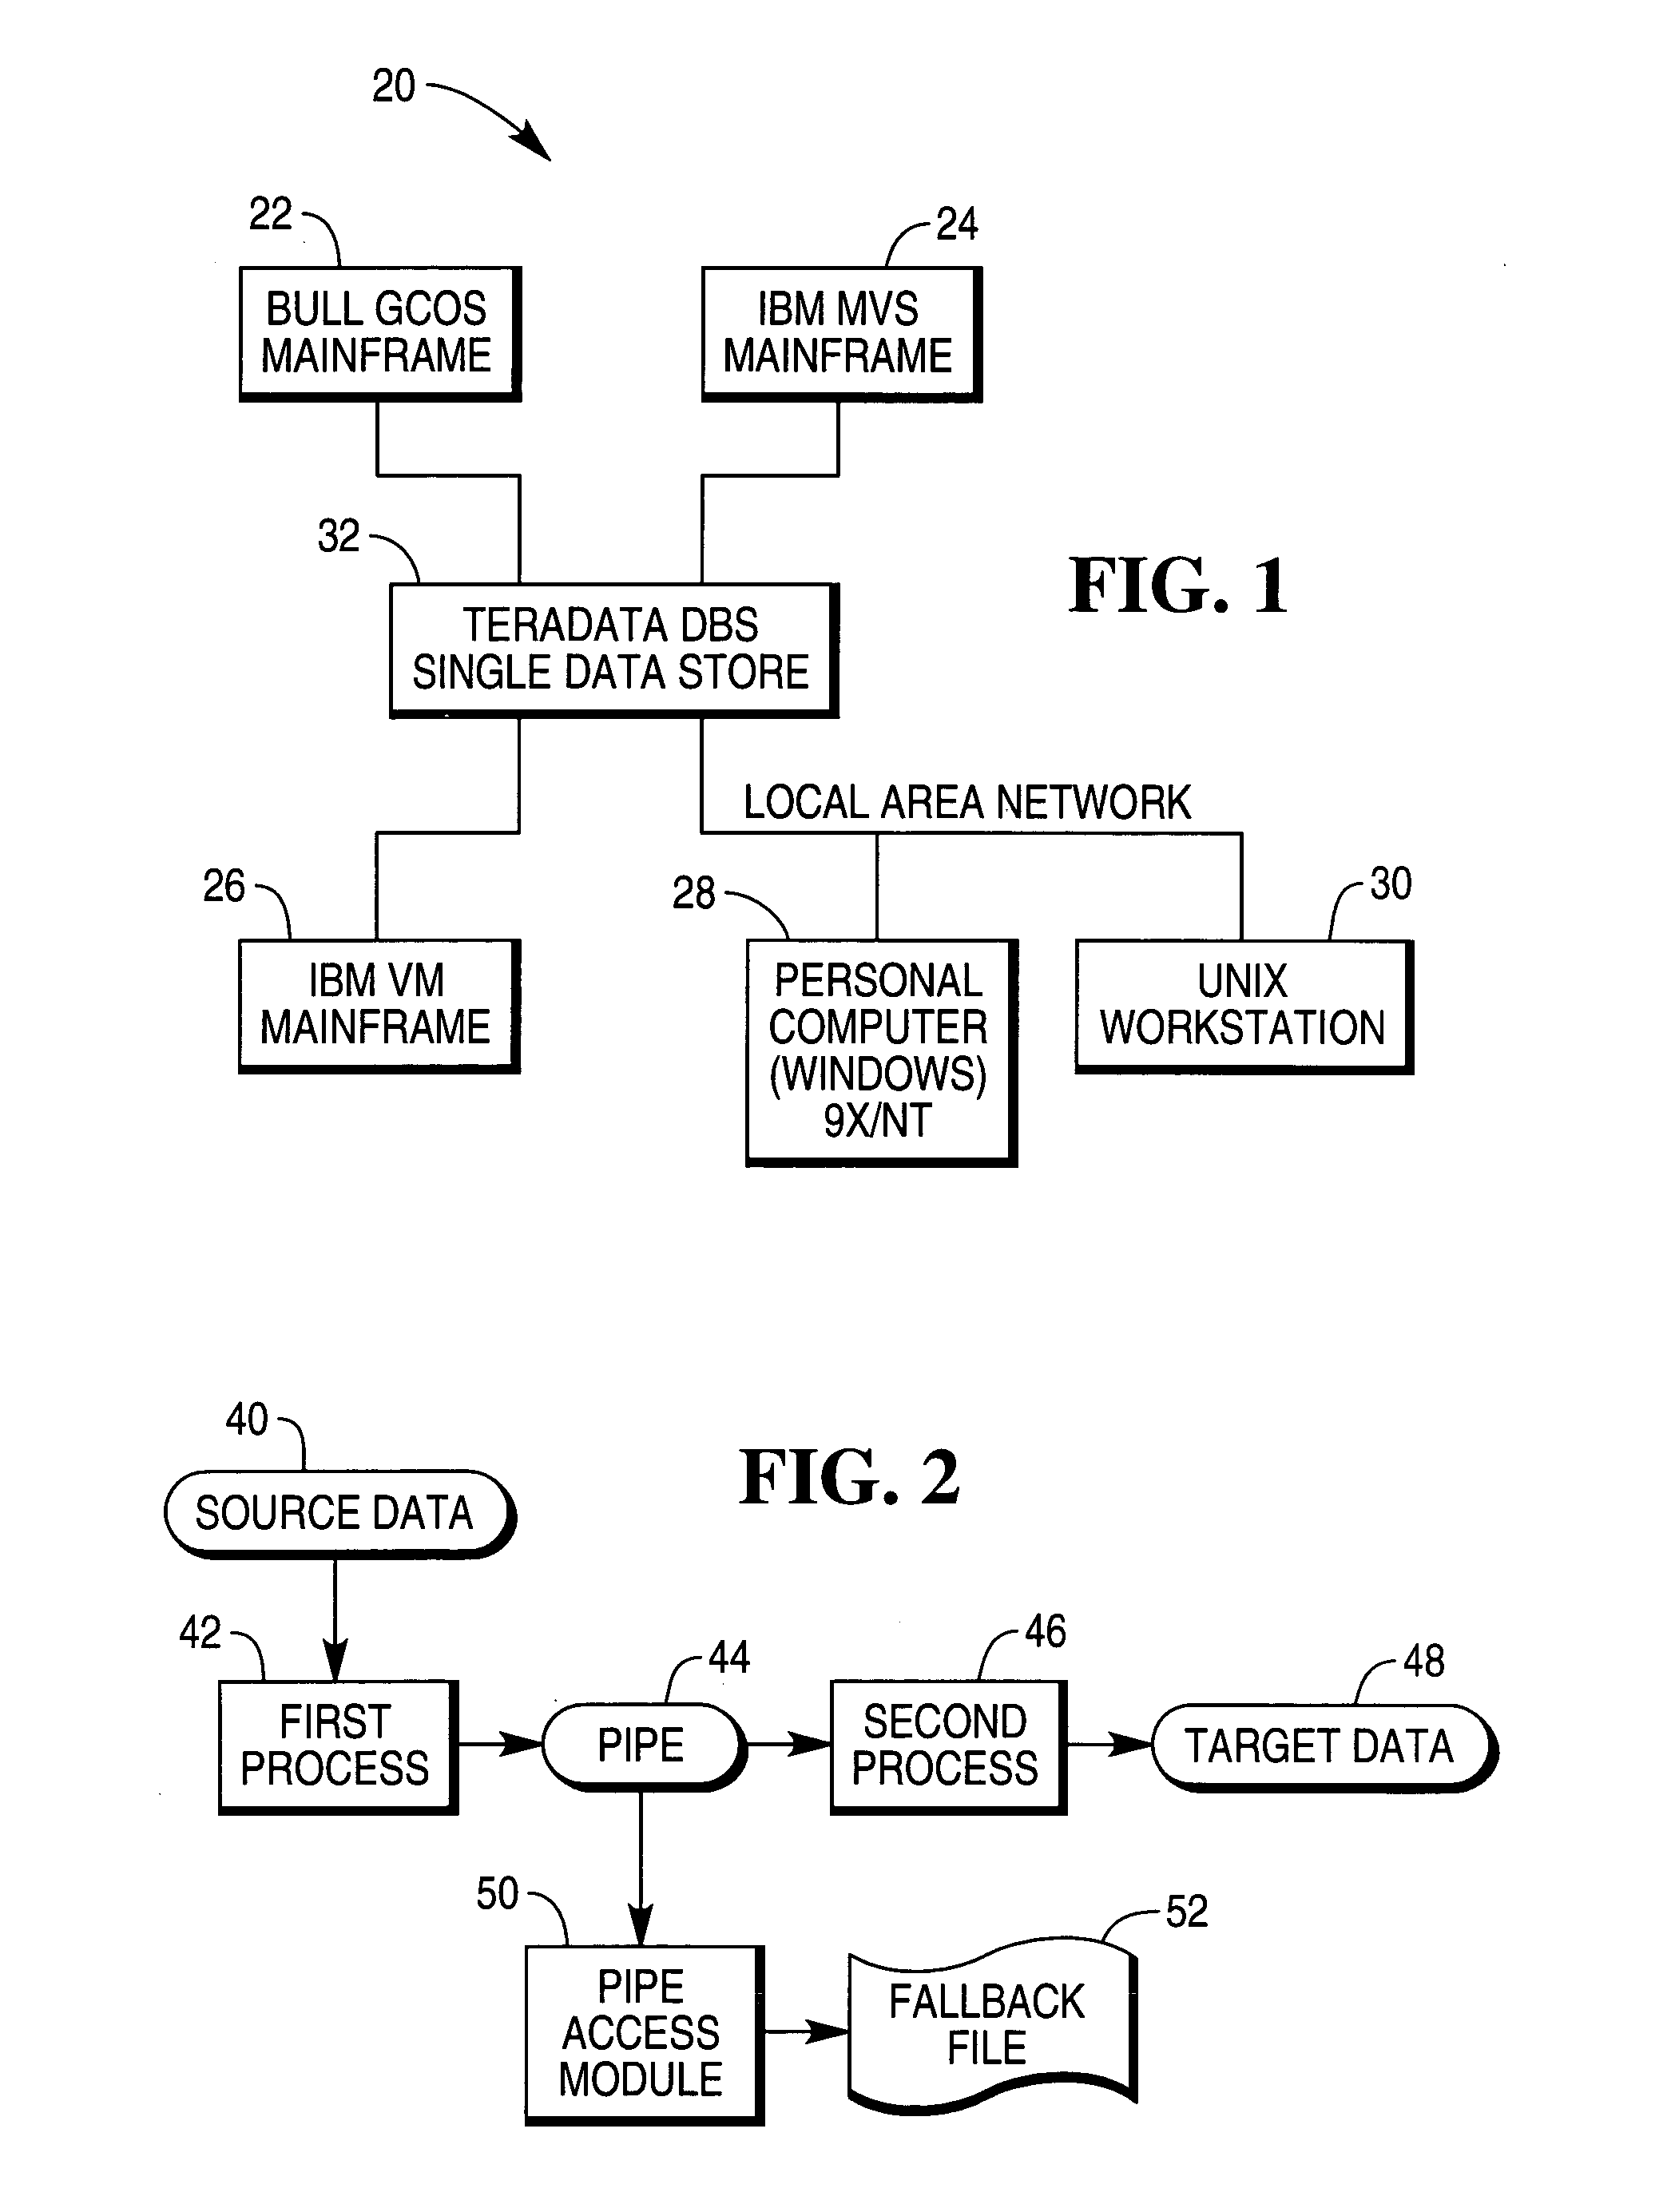 Method and system for transferring data using a volatile data transfer mechanism such as a pipe